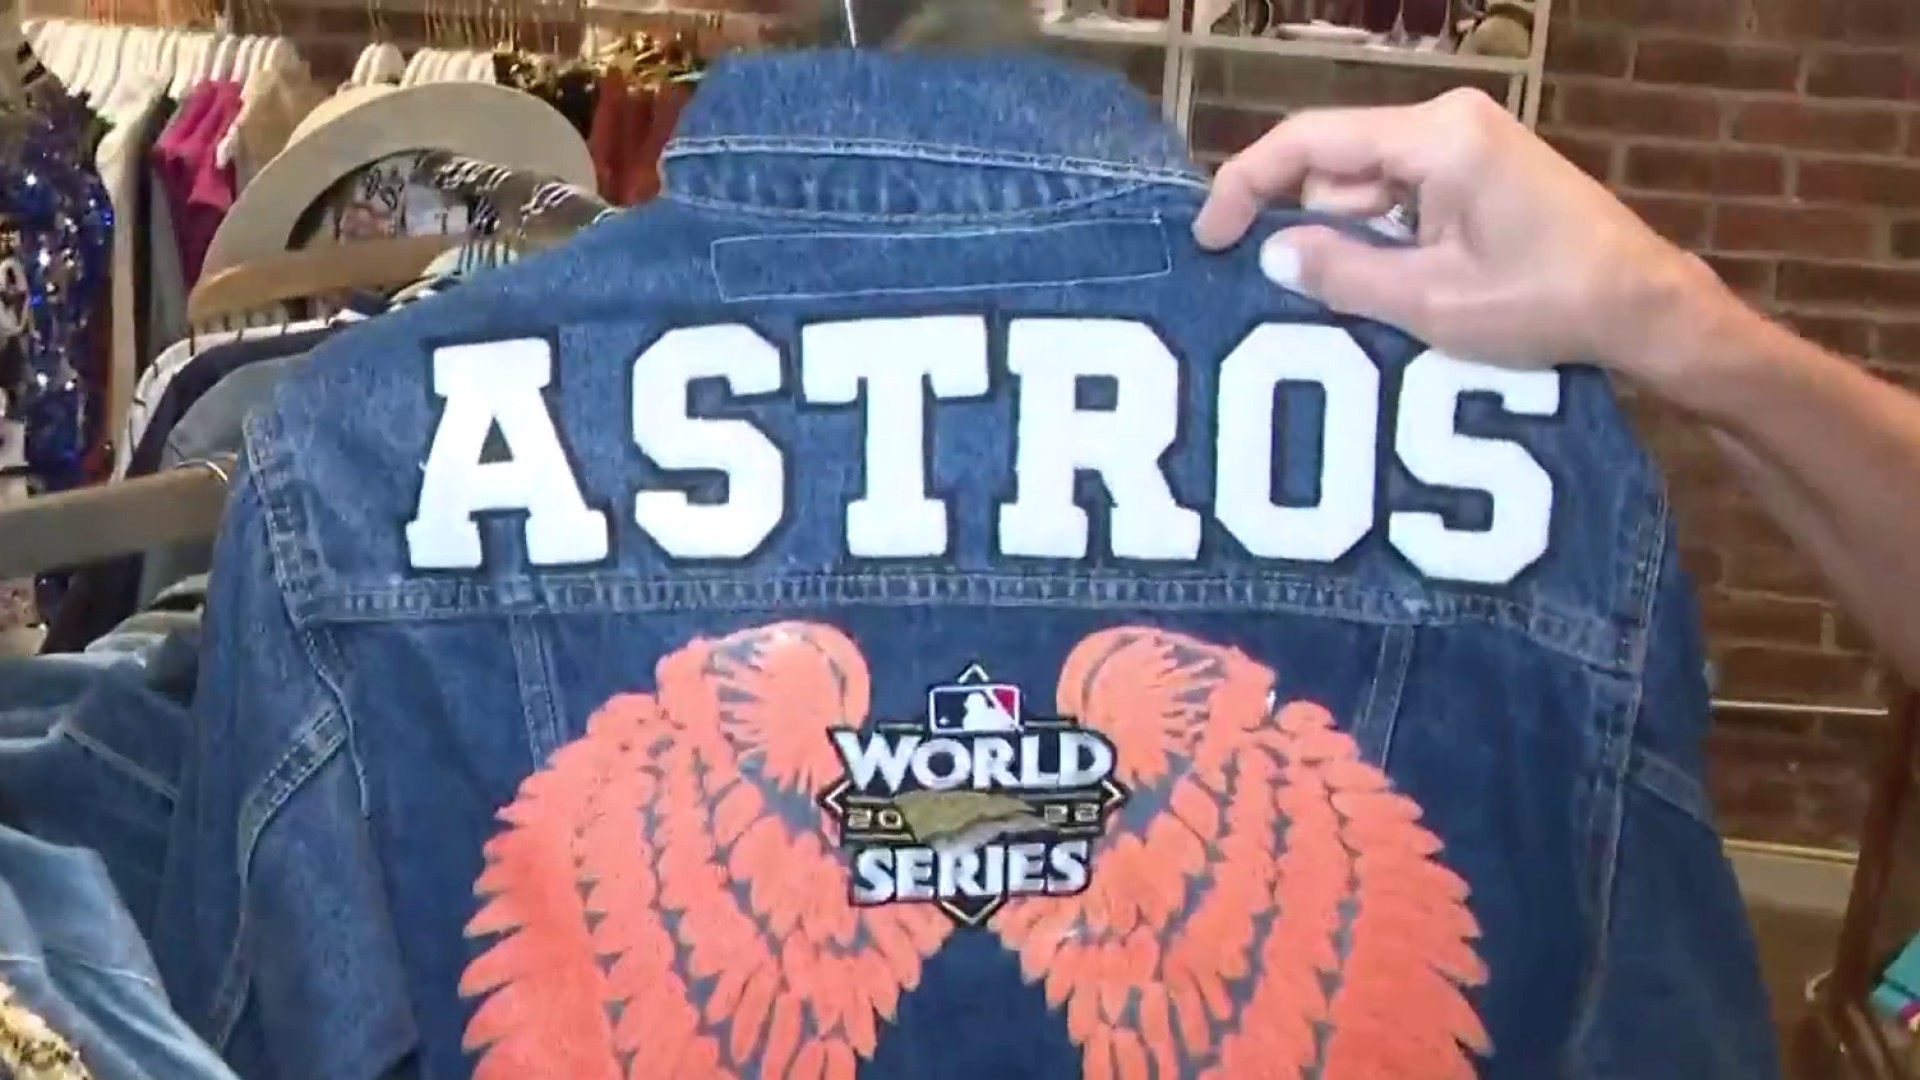 BLING, BLING, BLING: Get your customized Astros gear ahead of playoffs